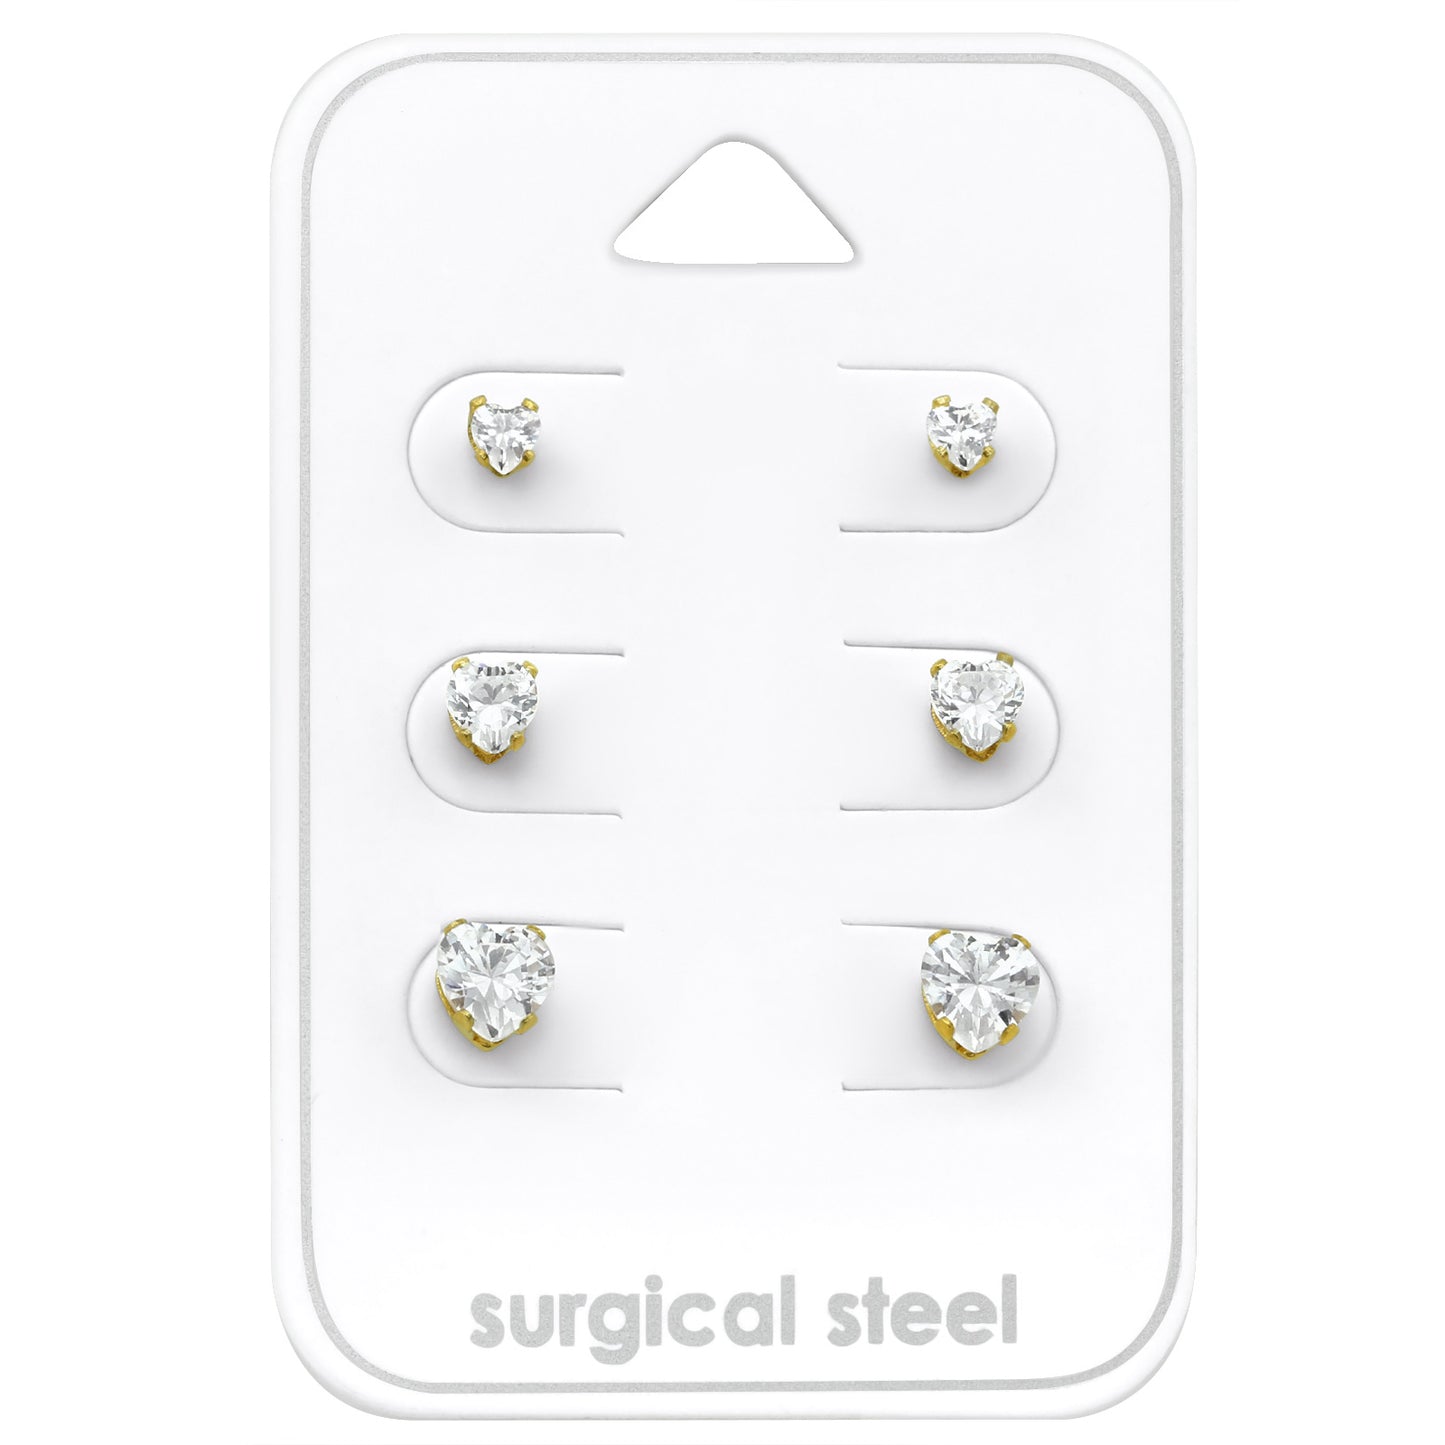 Real Gold Plated Surgical Steel earrings for sensitive ears - Set of 3